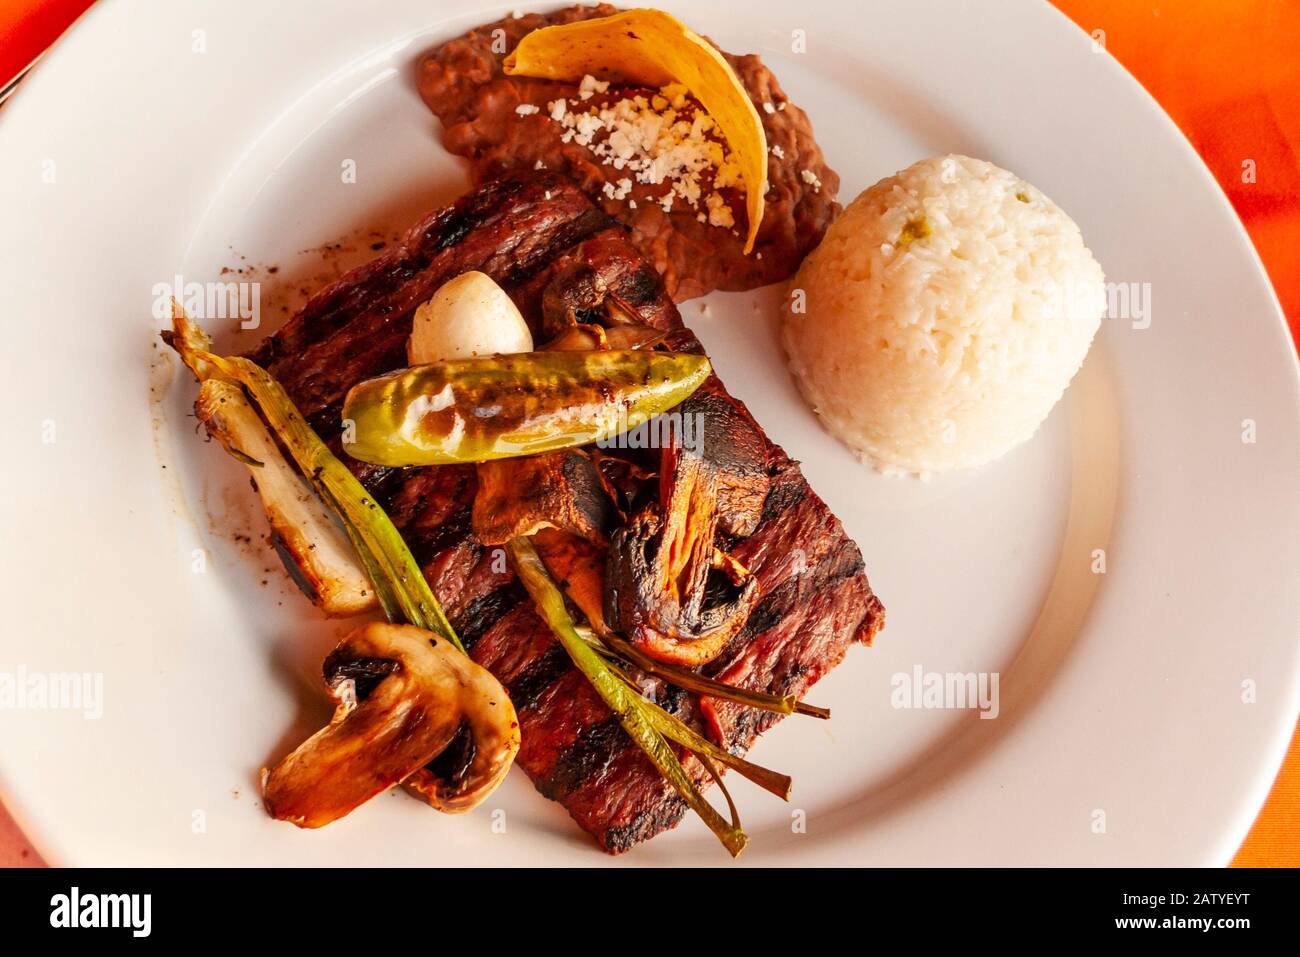 Carne Asada is a local favorite in Puerto Vallarta, Jalisco, Mexico.  Here it is plated with grilled peppers and served with a side of rice. Stock Photo